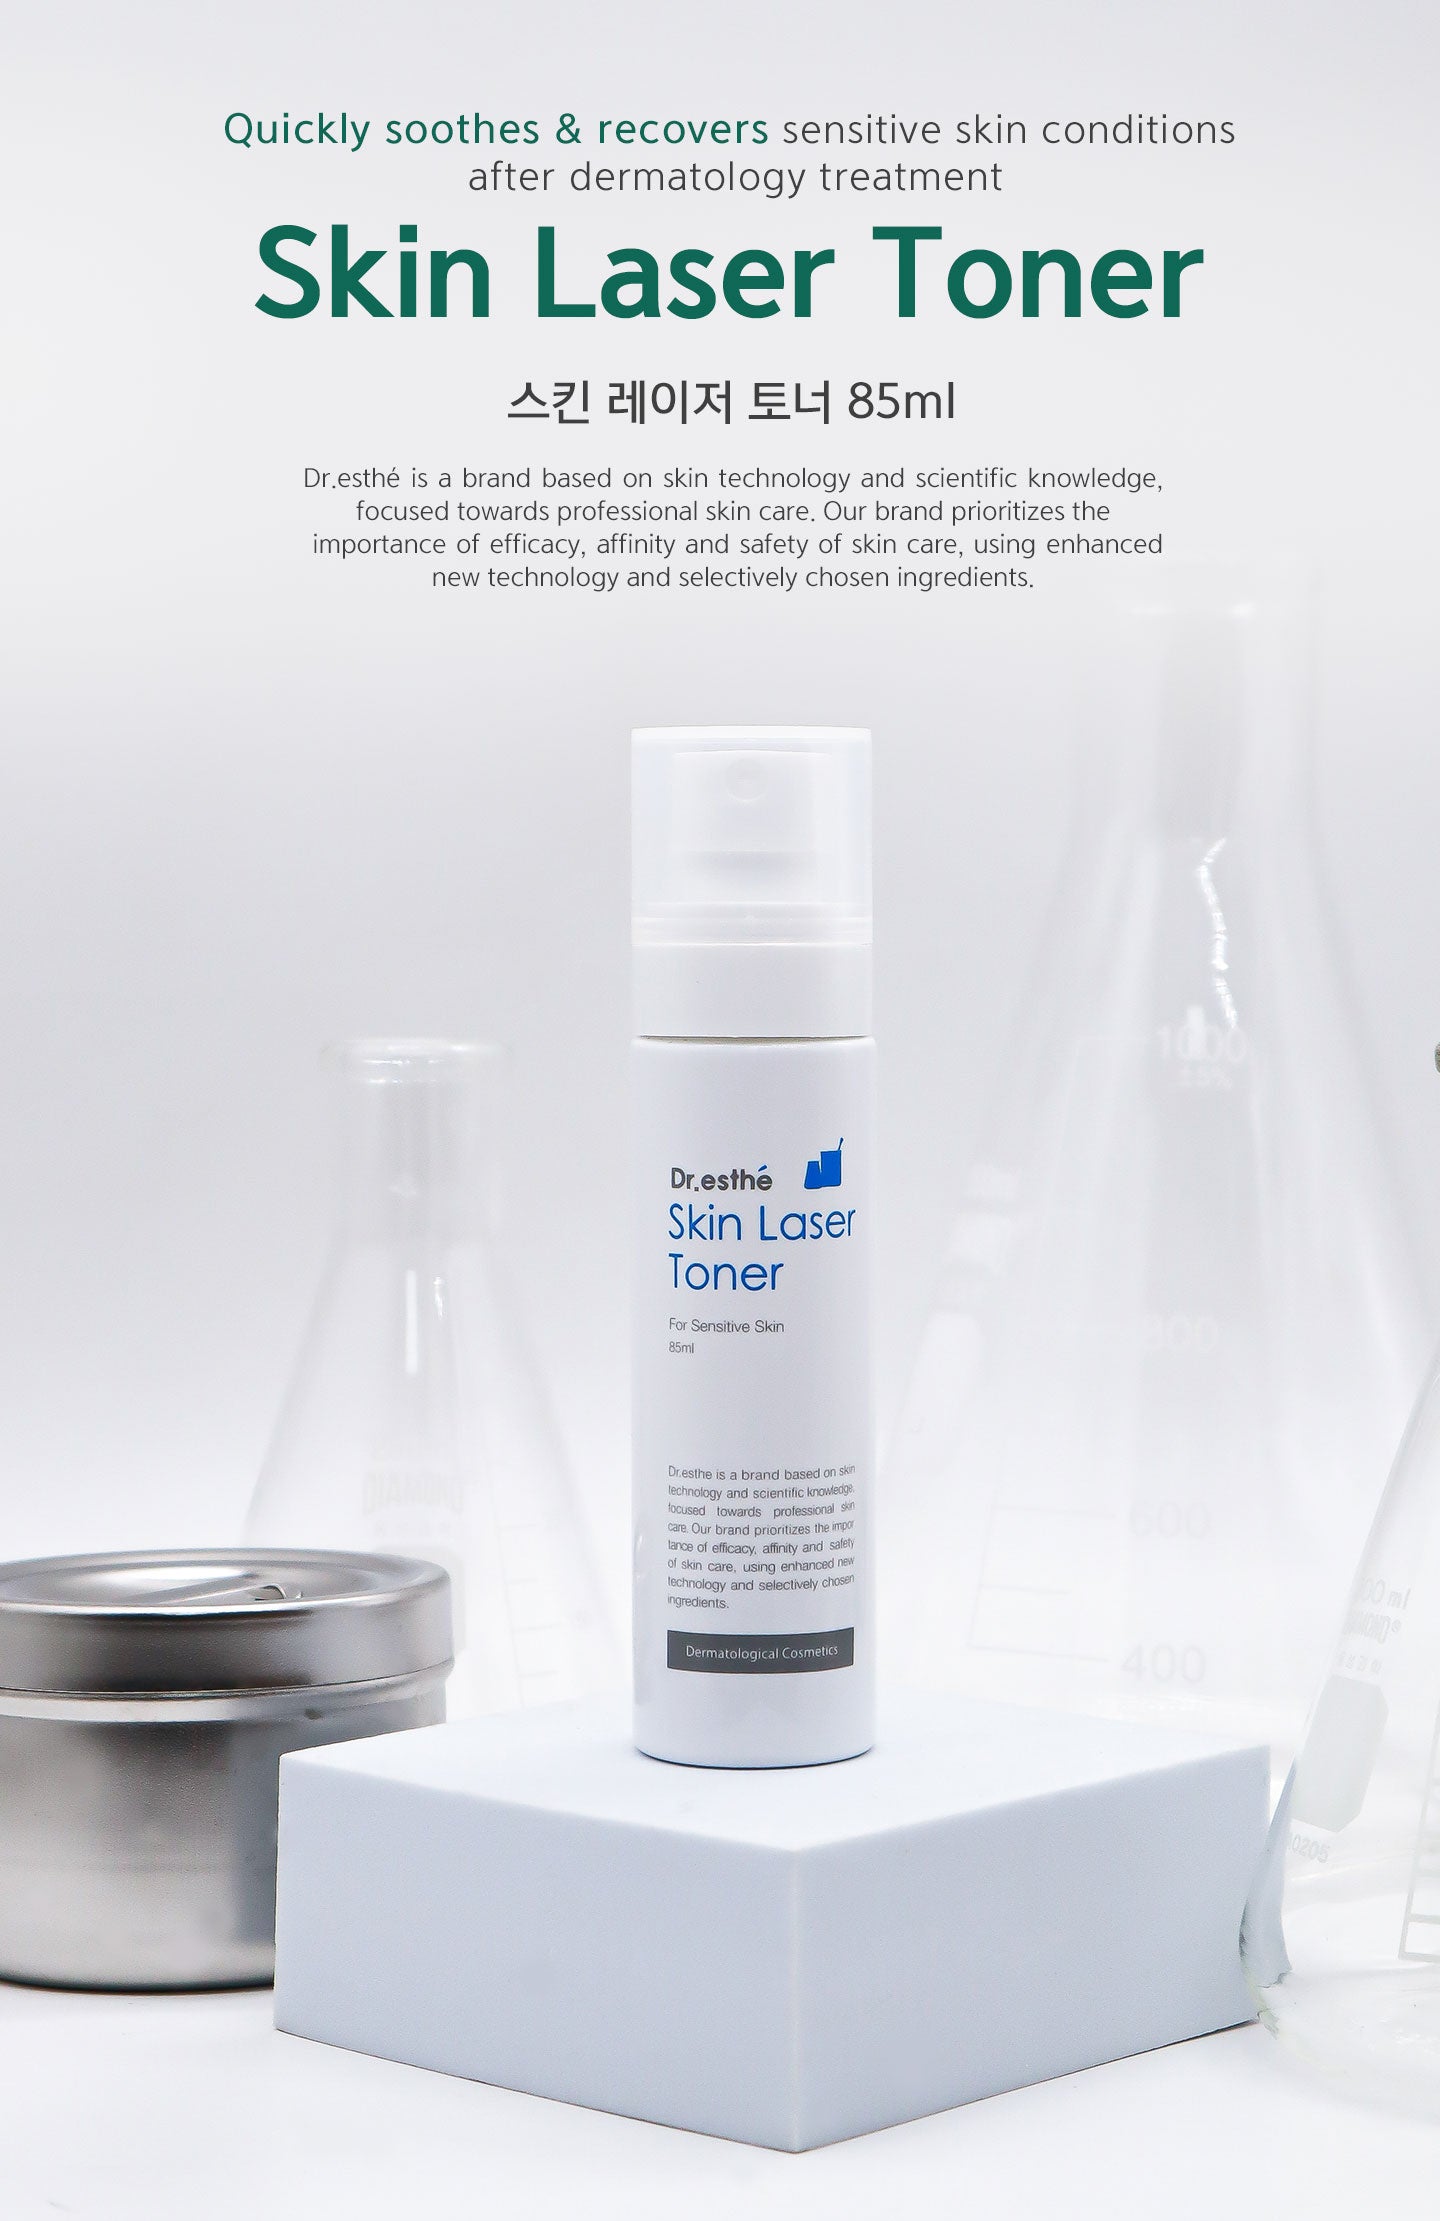 Quickly soothes & recovers sensitive skin conditions after dermatology treatment. Skin laser toner